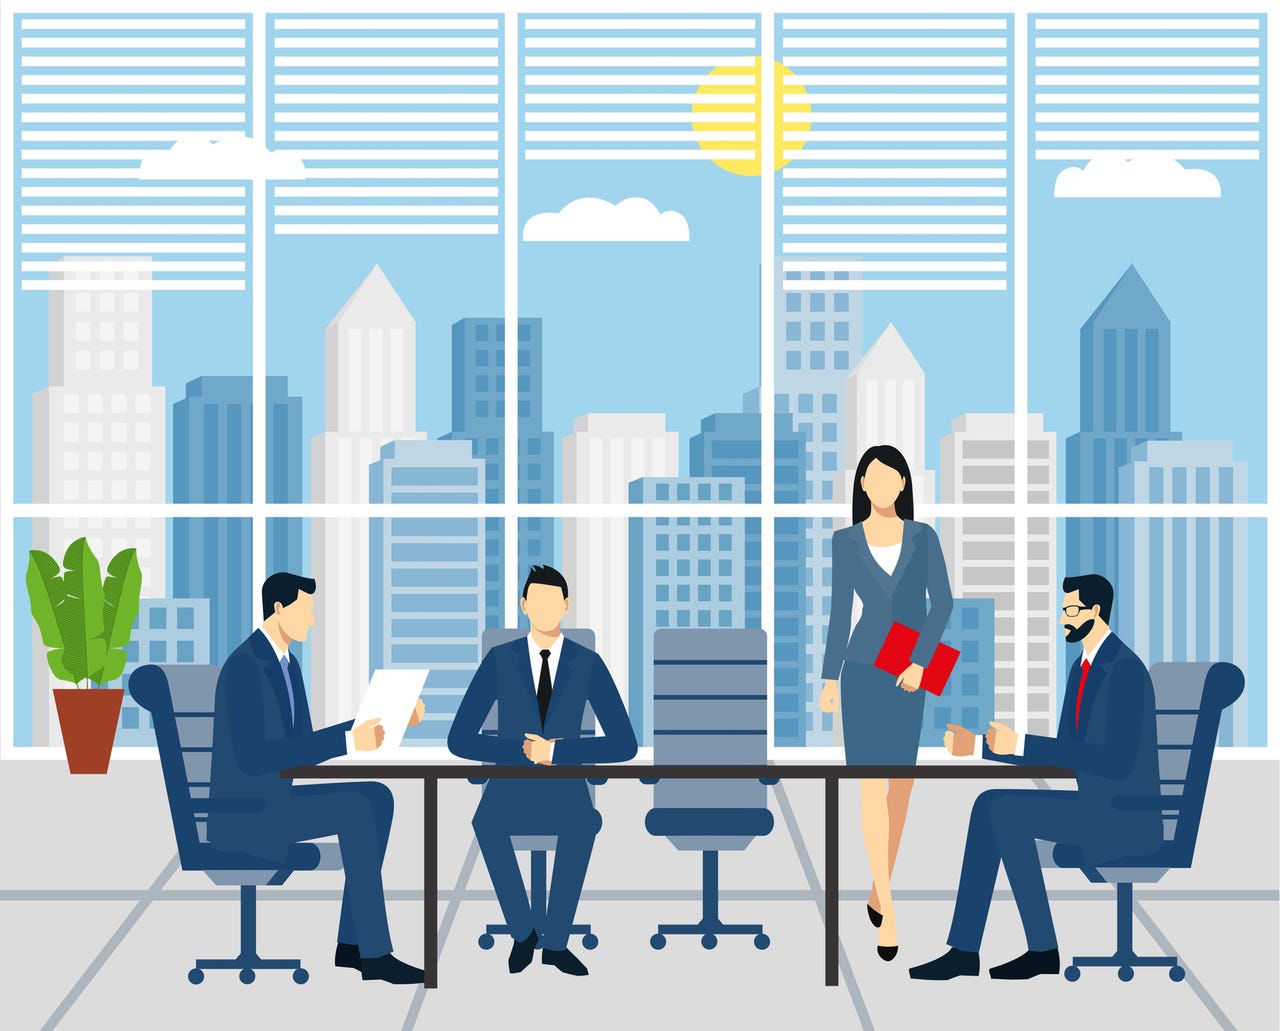 Stylized depiction of four businessmen at the office desk, one standing active